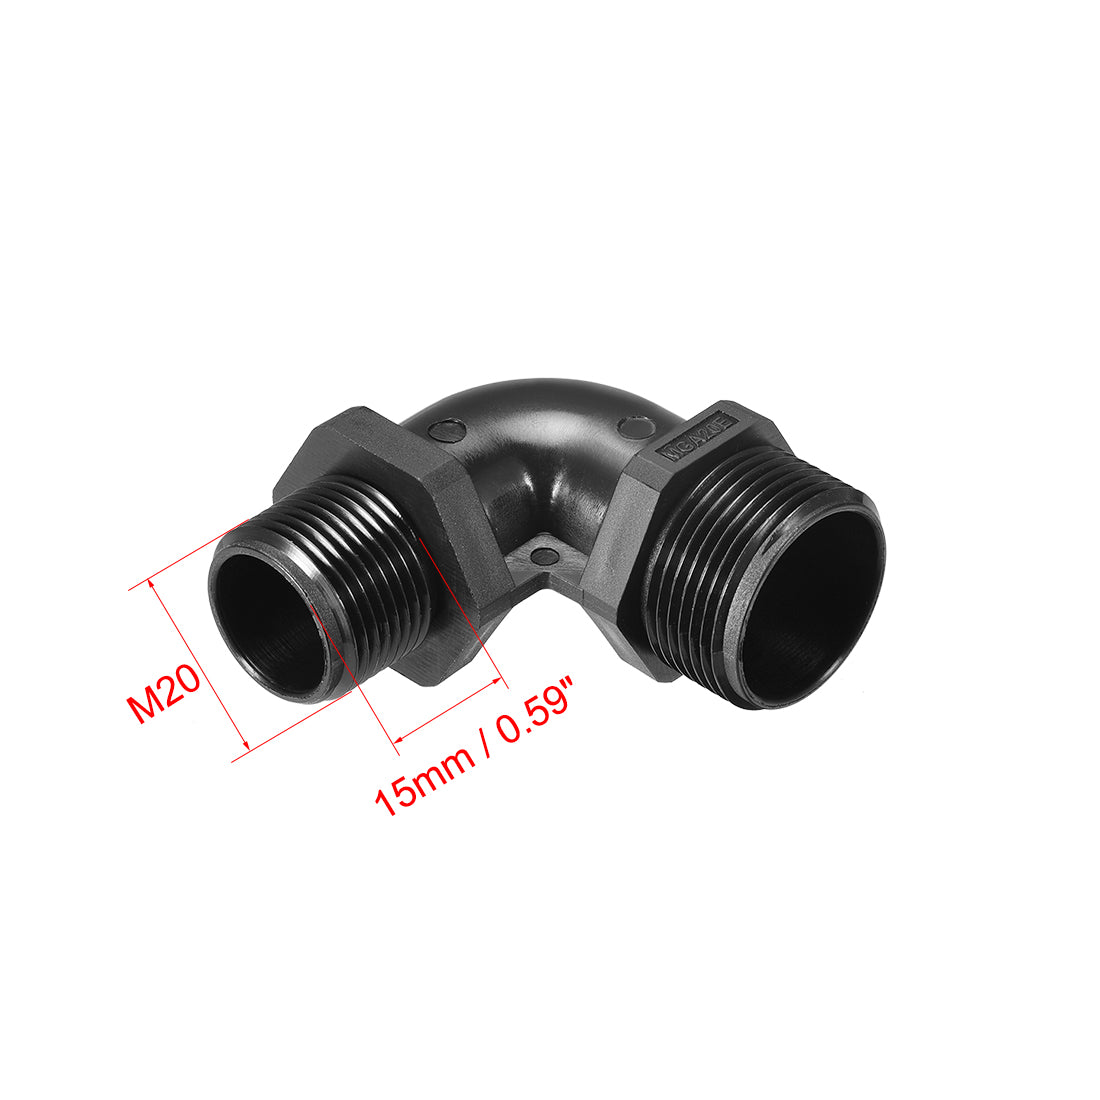 Uxcell Uxcell M20 Cable Gland 90 Degree Waterproof IP68 Nylon Joint Adjustable Locknut with Strain Relief for 9mm-14mm Dia Cable Wire , 2 Pcs